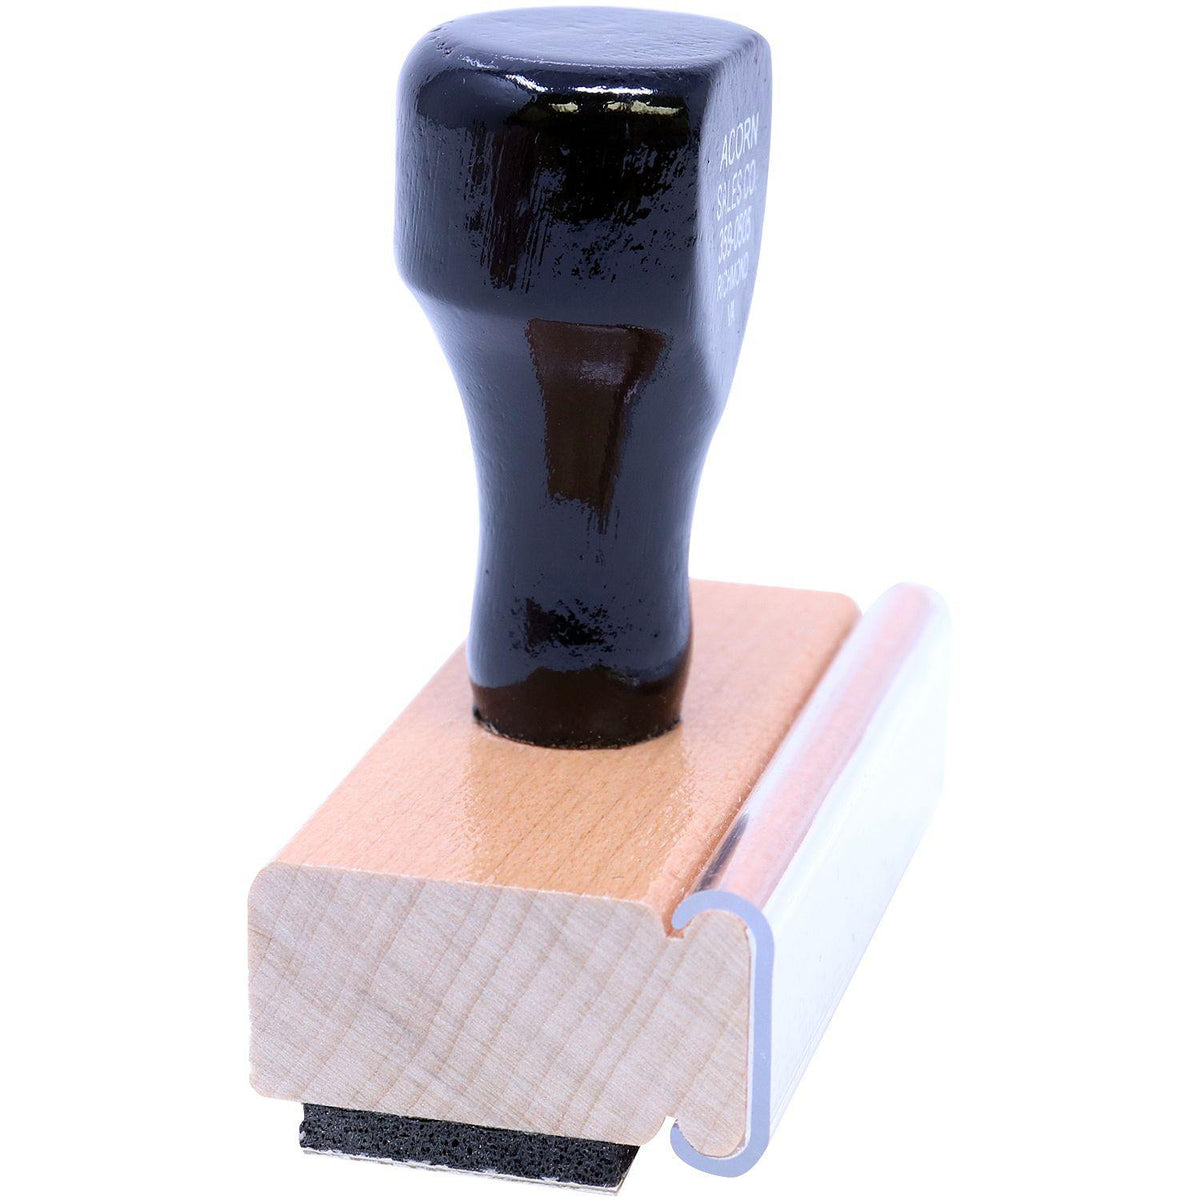 Package Services Rubber Stamp - Engineer Seal Stamps - Brand_Acorn, Impression Size_Small, Stamp Type_Regular Stamp, Type of Use_Office, Type of Use_Postal &amp; Mailing, Type of Use_Shipping &amp; Receiving